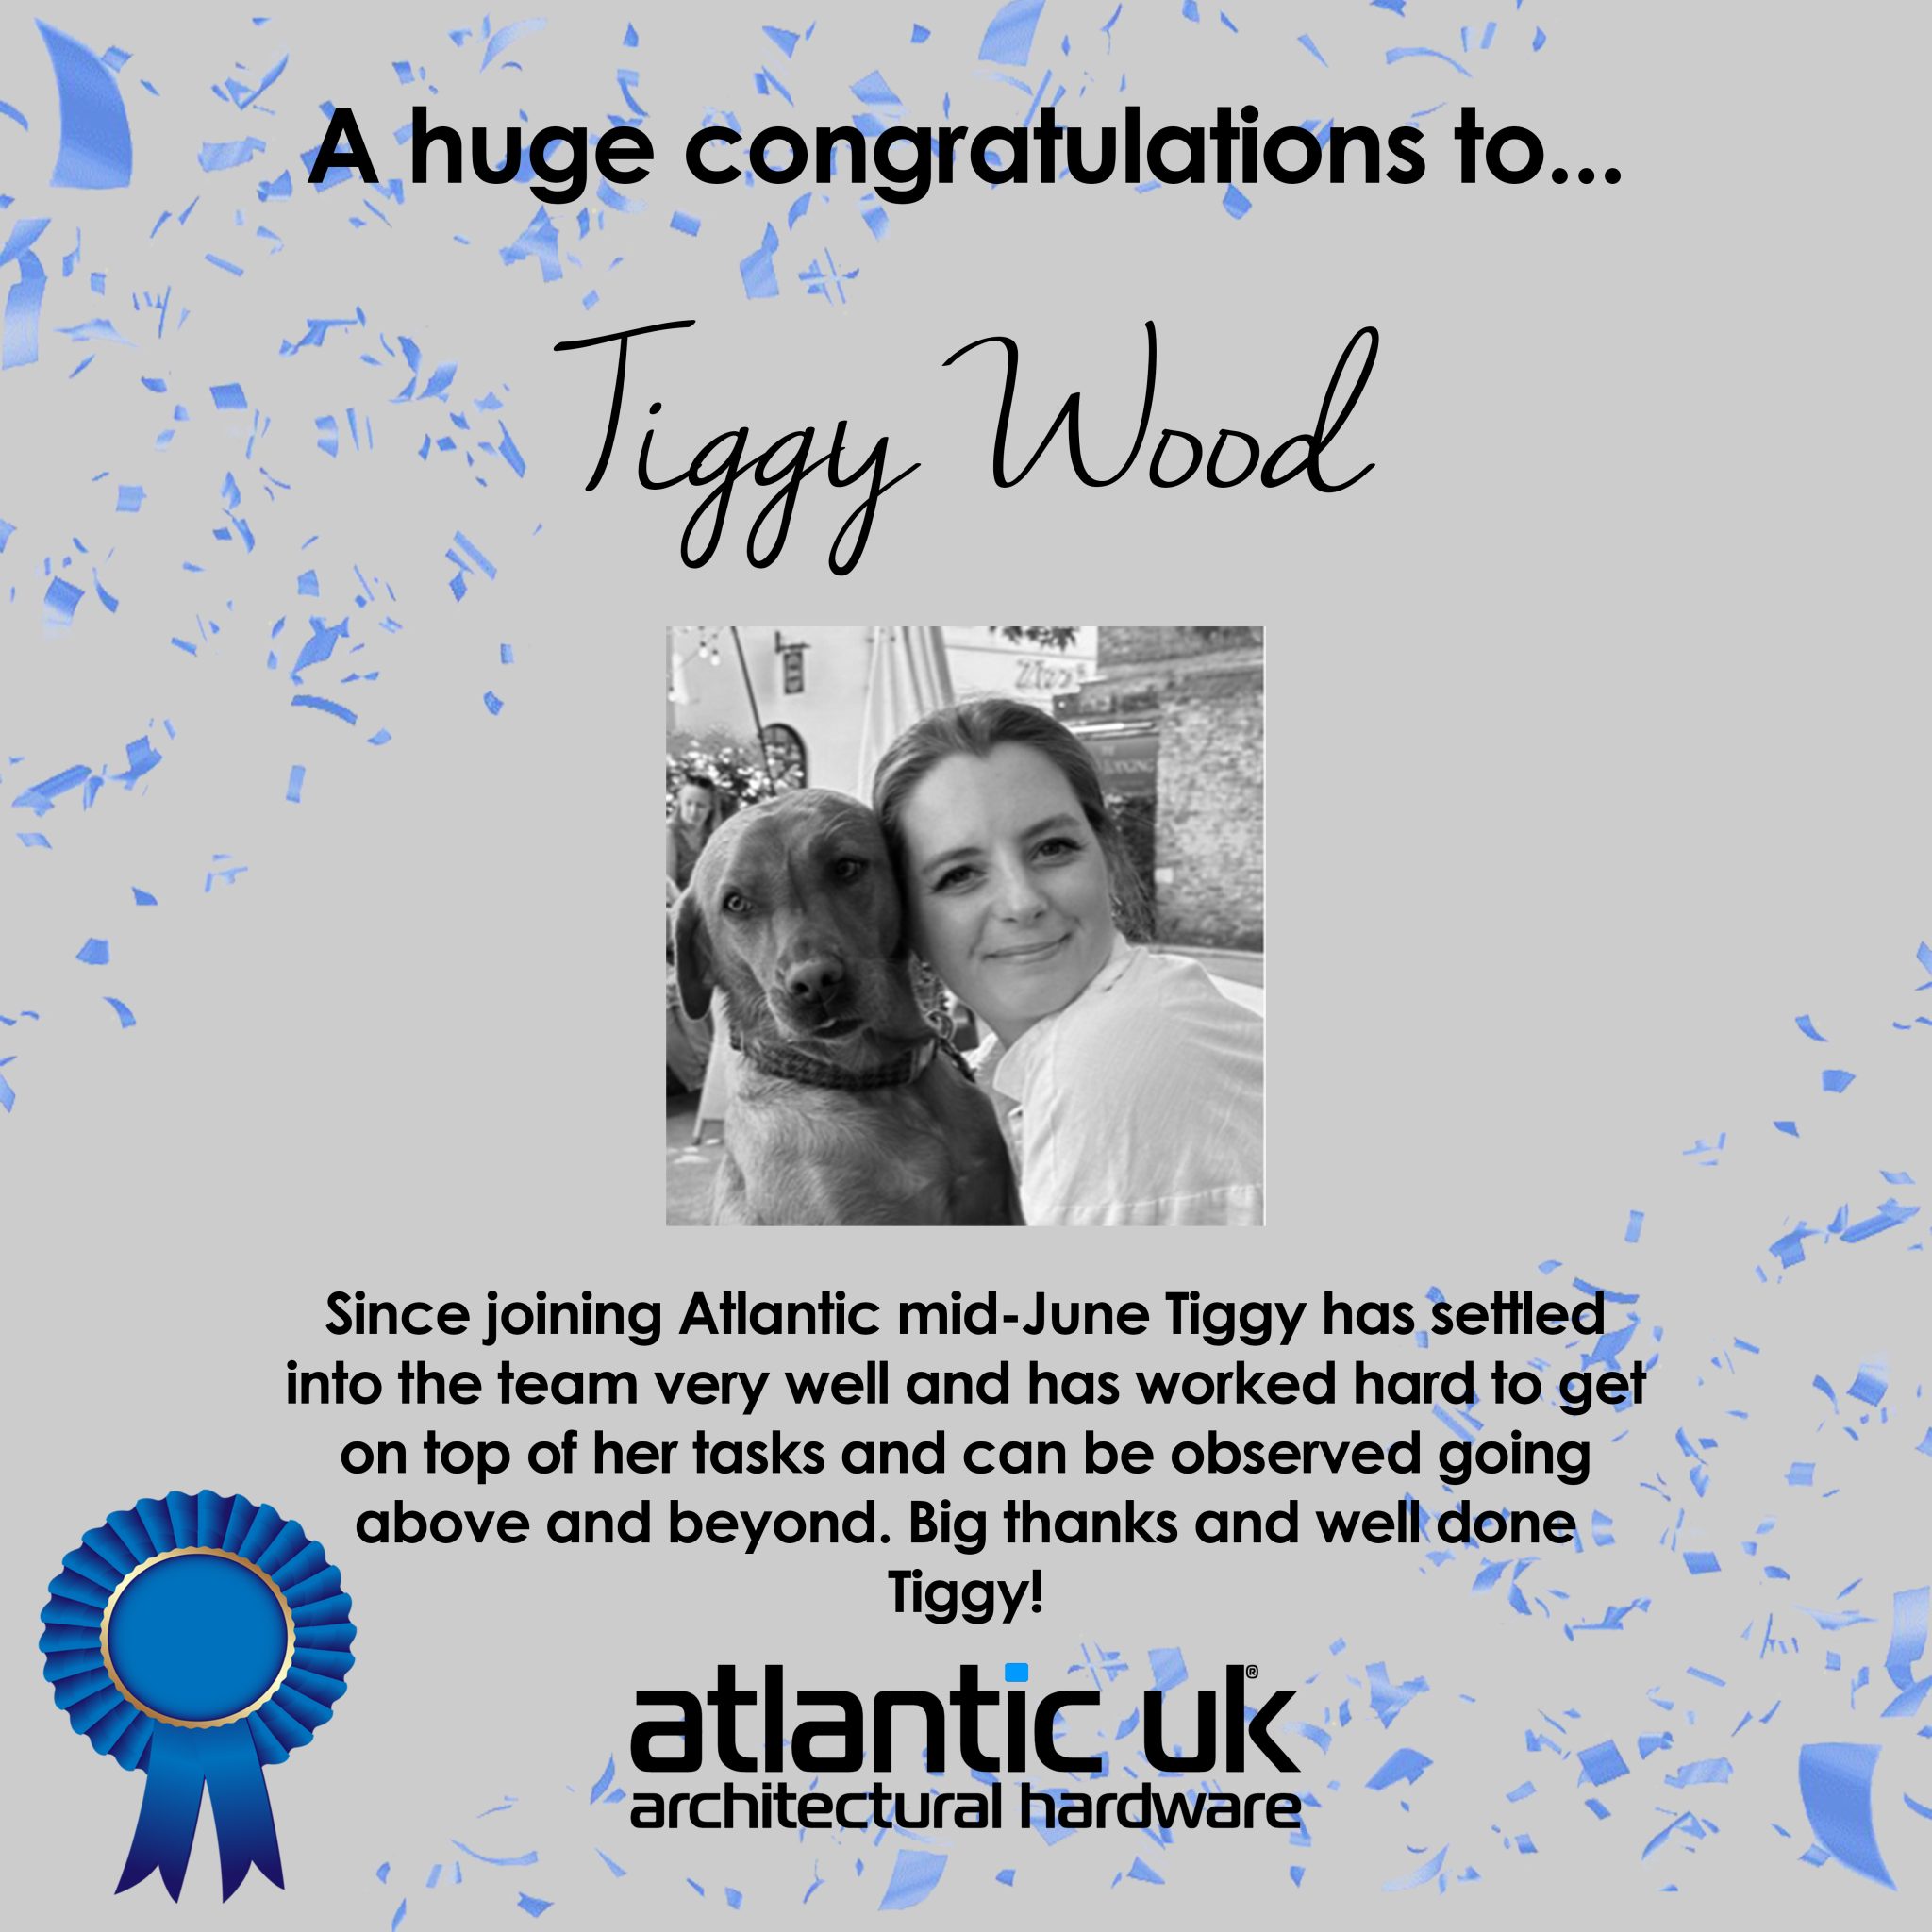 Congratulations Tiggy! Employee of the month for July! image